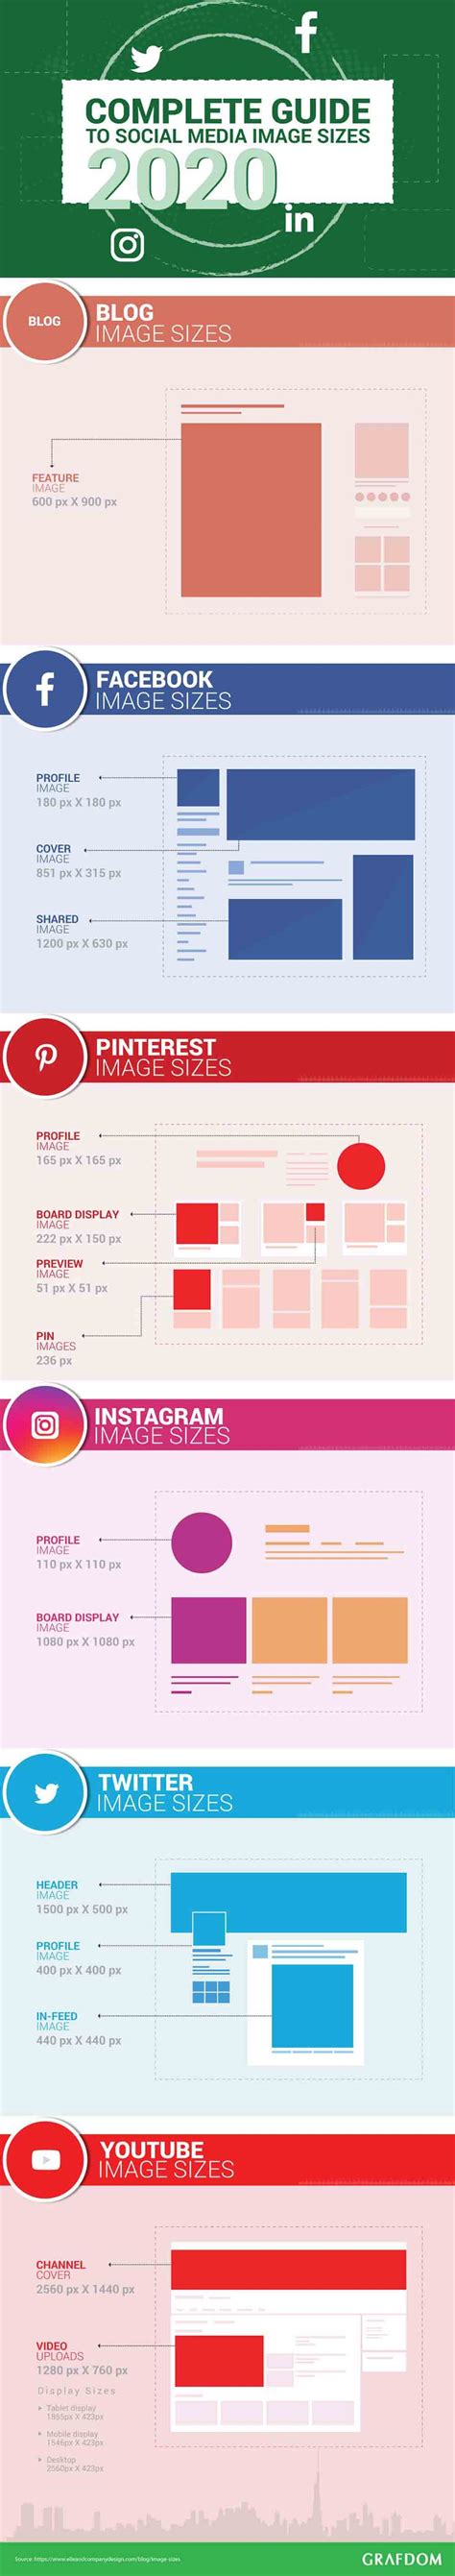 Infographic On Complete Guide To Social Media Image Sizes In 2020 By